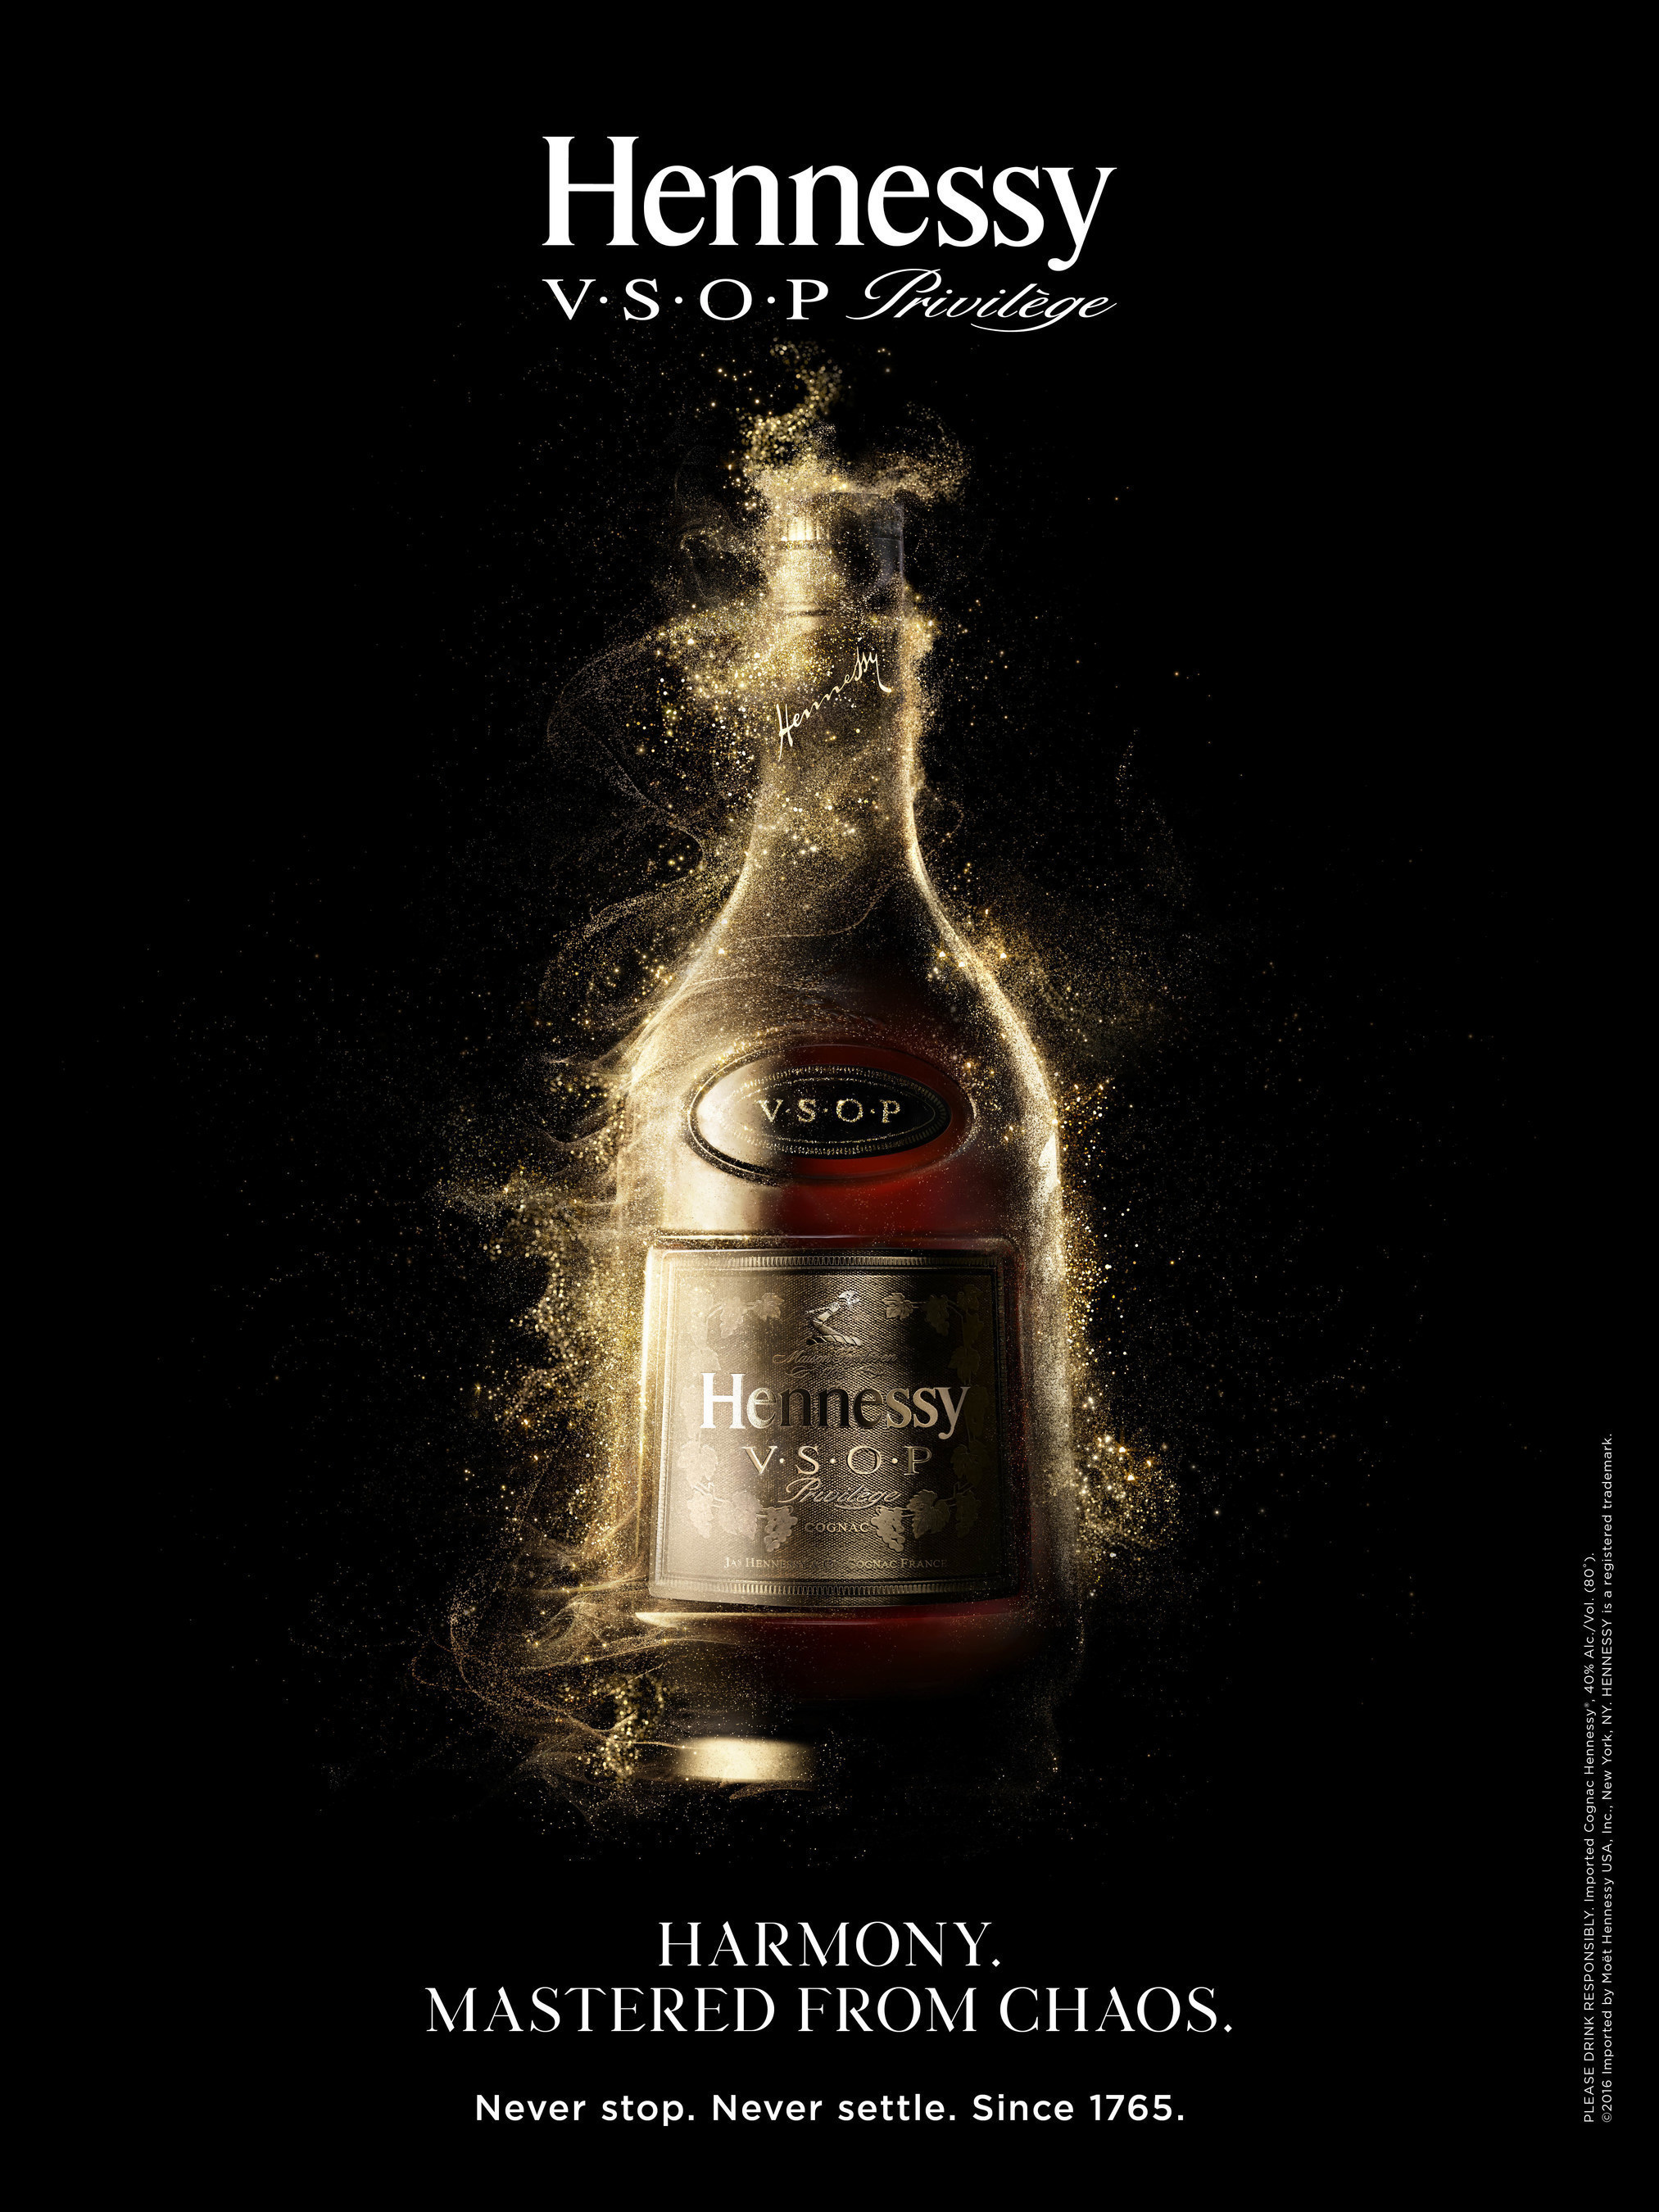 The "Harmony. Mastered from Chaos." campaign showcases the numerous, complex variables that are mastered in order to create the harmony and balance of Hennessy V.S.O.P Privilège.